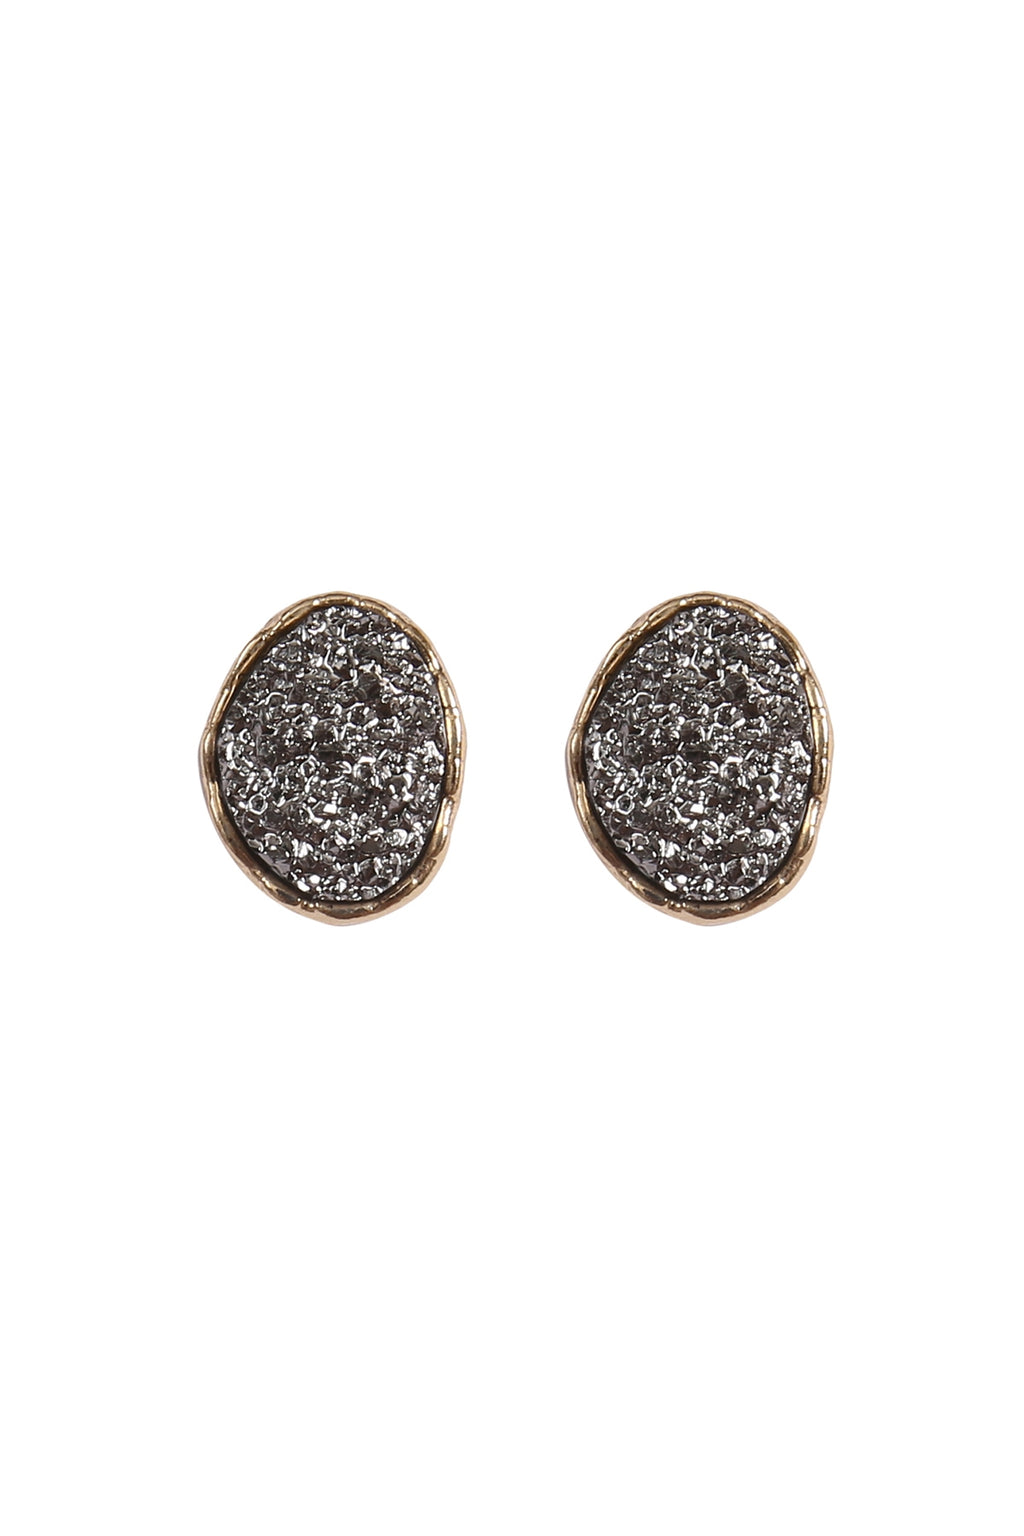 Oval Druzy Stone Post Earrings Gold Hematite  - Pack of 6